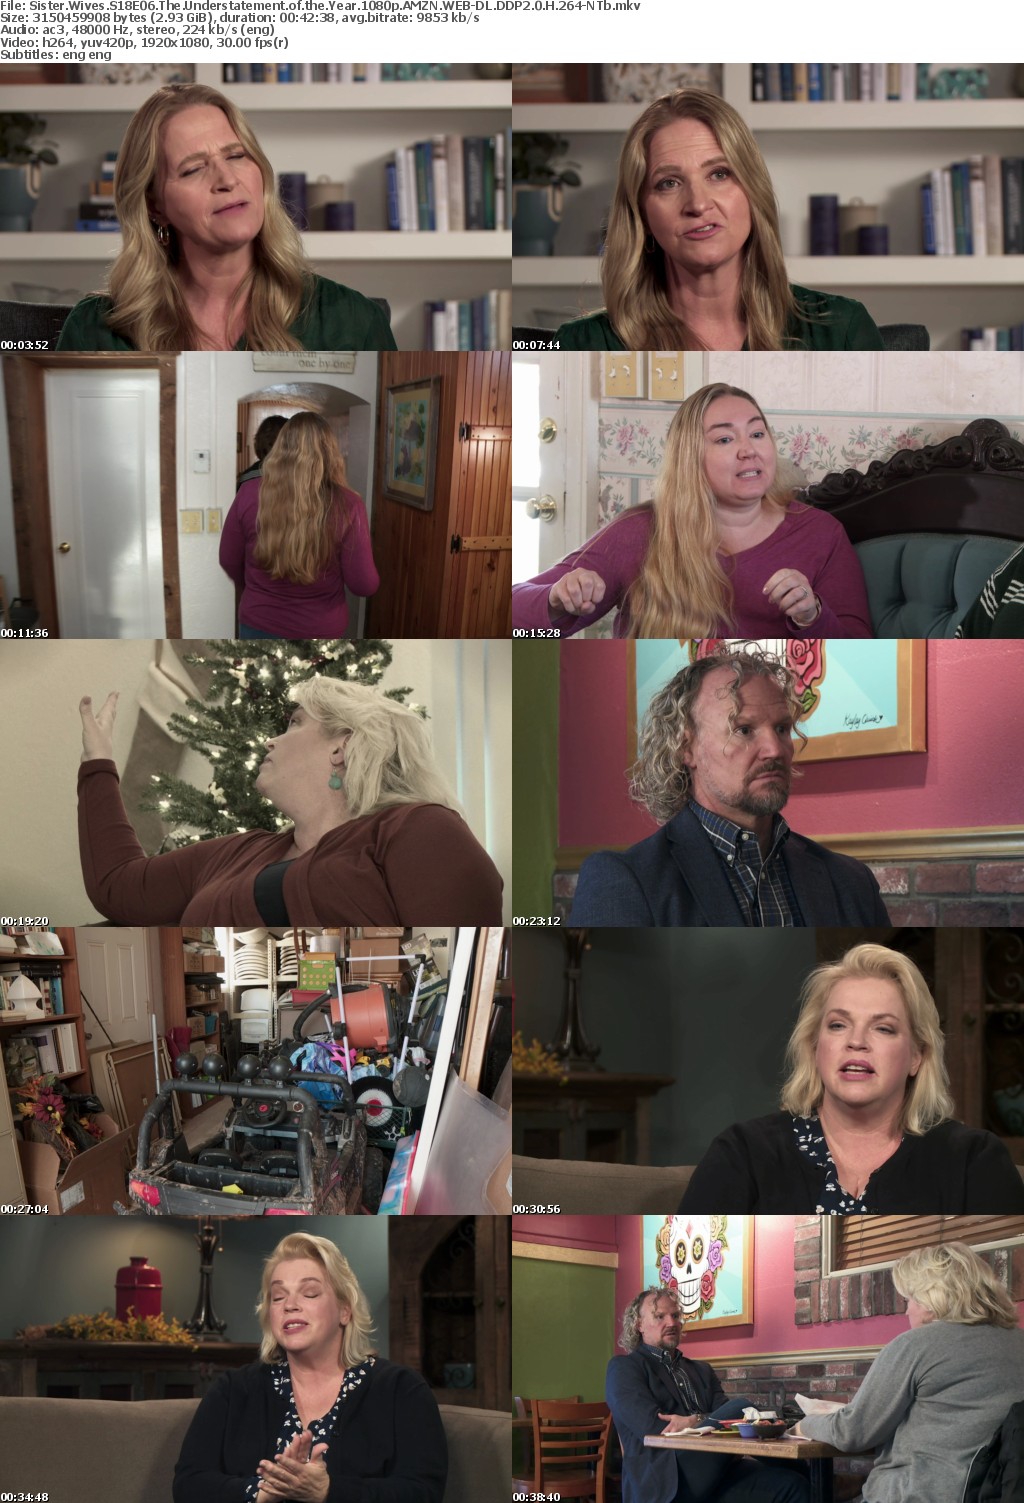 Sister Wives S18E06 The Understatement of the Year 1080p AMZN WEB-DL DDP2 0 H 264-NTb